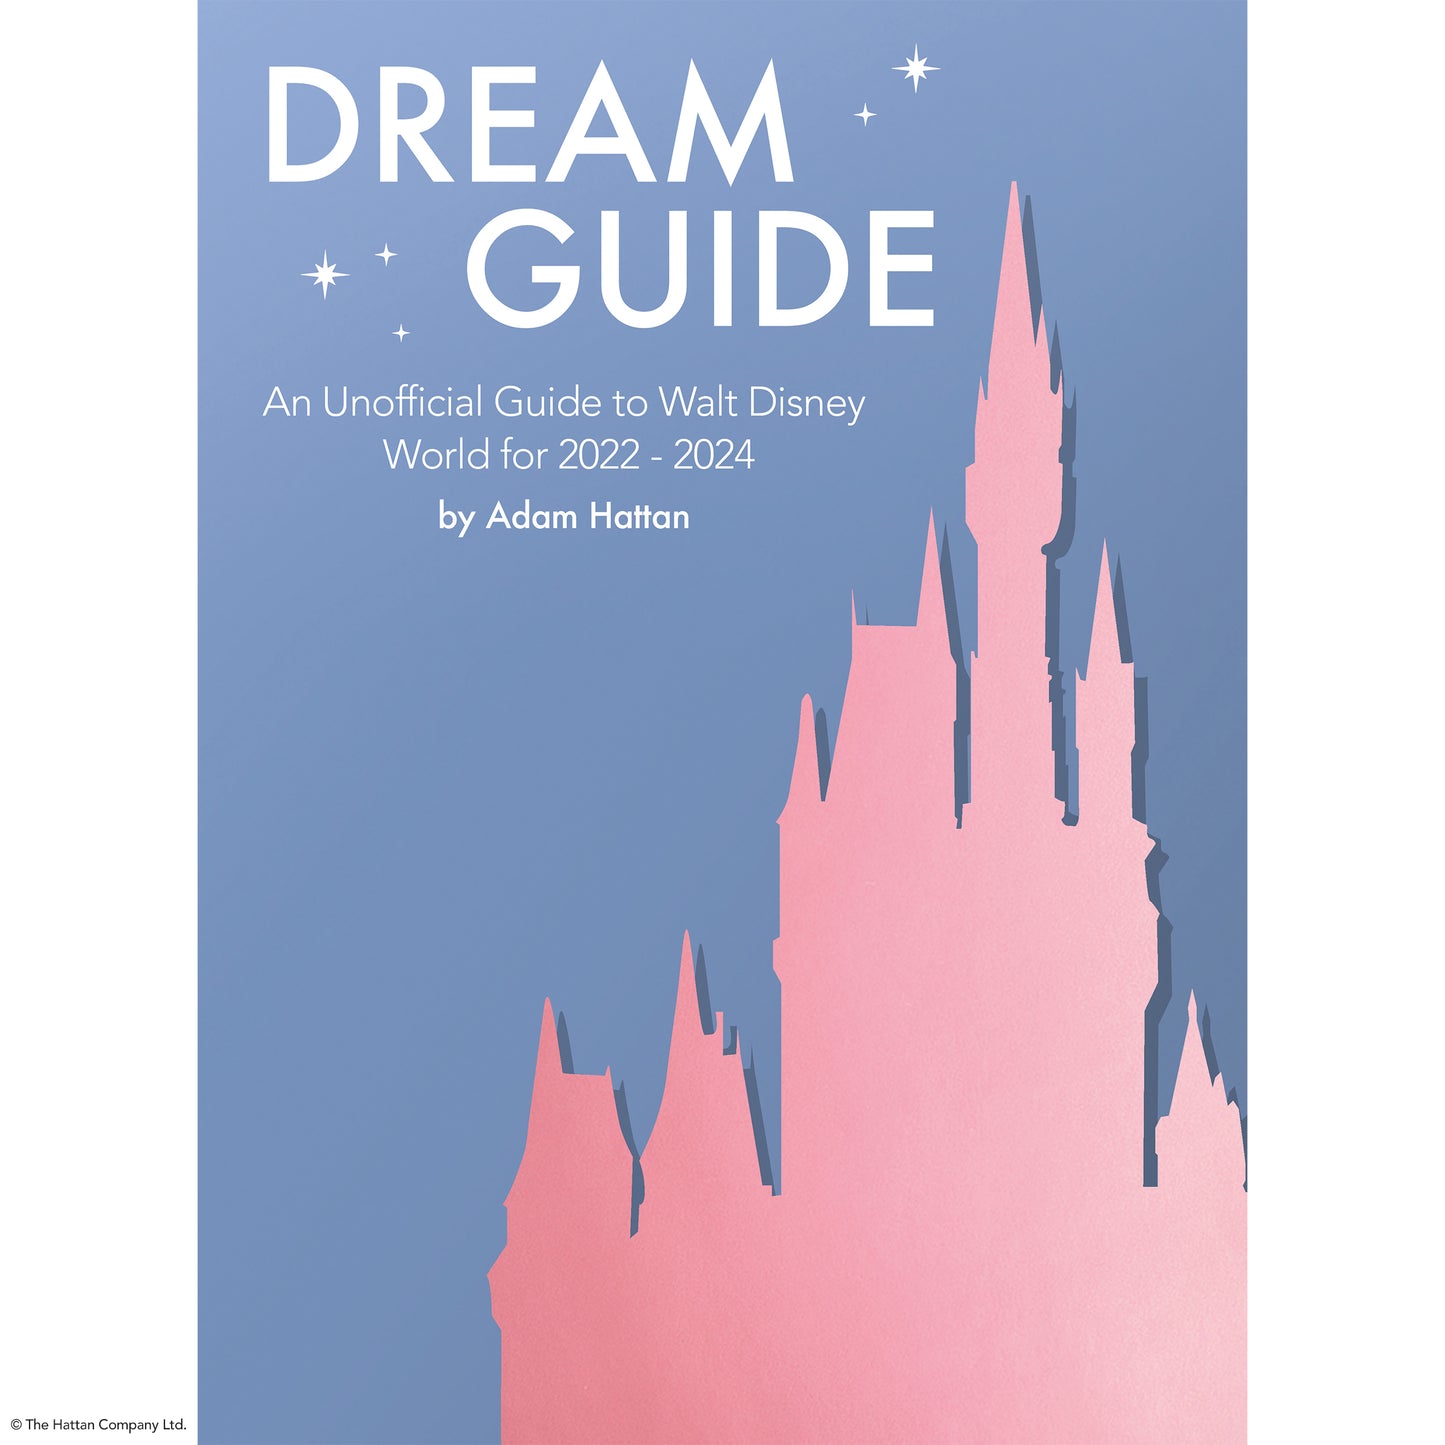 Dream Guide: An Unofficial Guide to Walt Disney World for 2022 - 2024